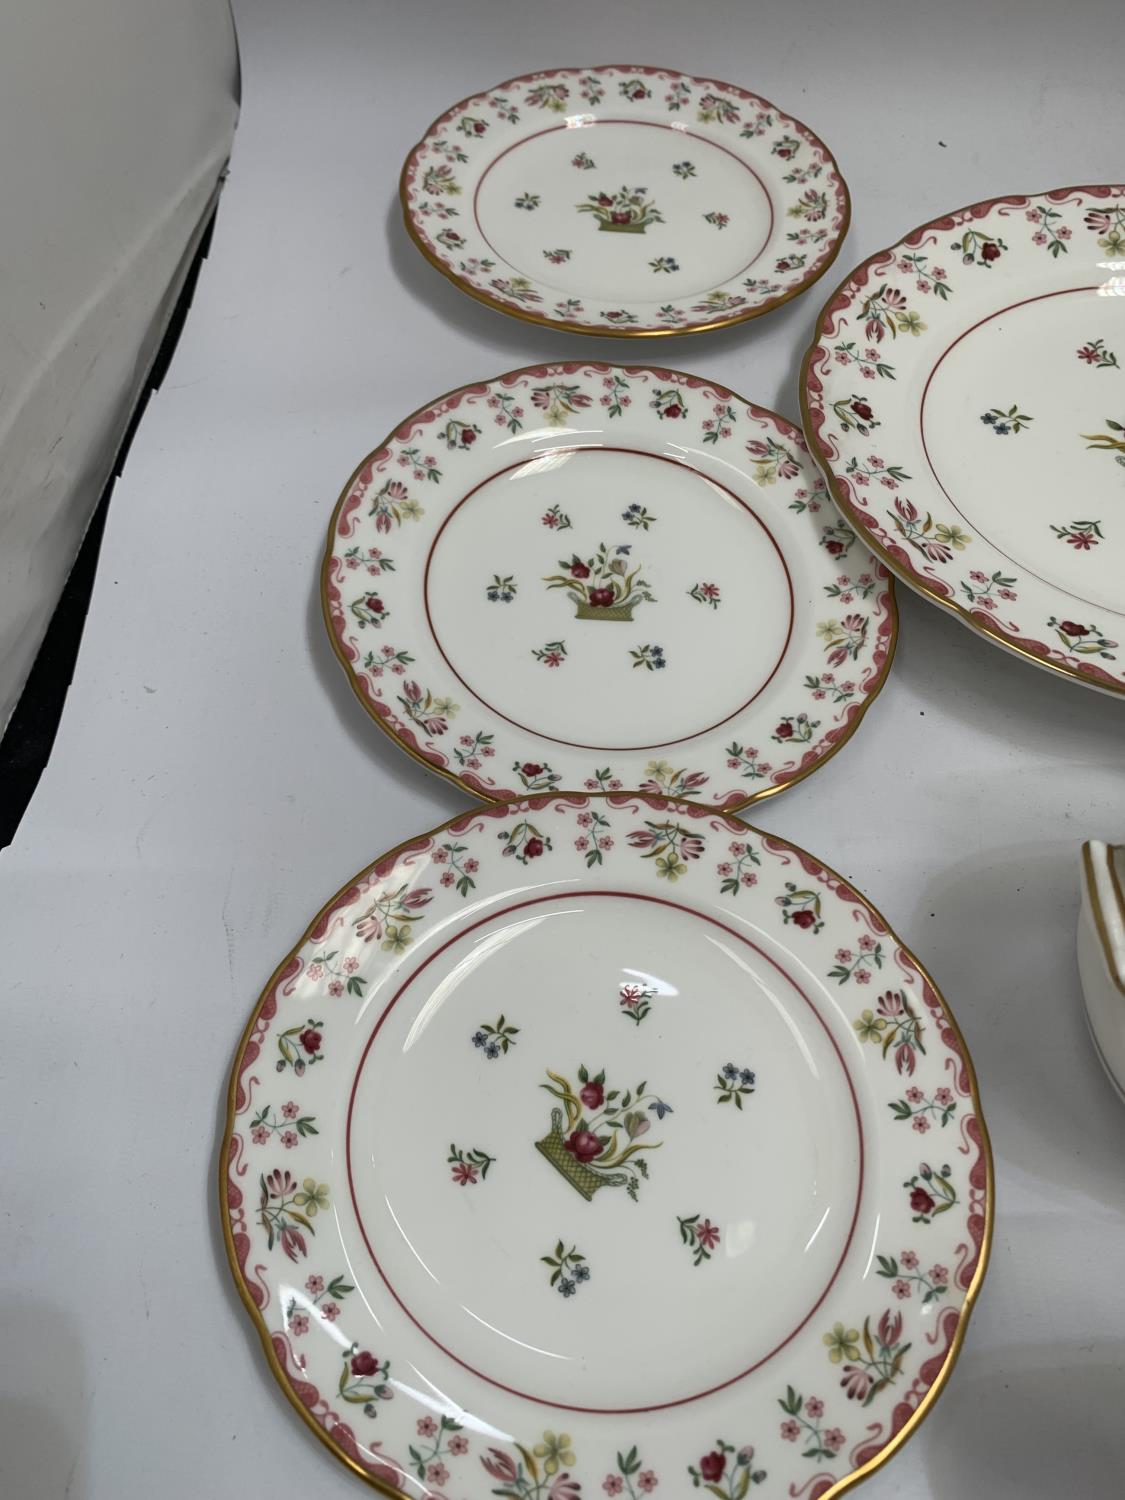 A QUANTITY OF WEDGWOOD 'BIANCA' TO INCLUDE A CAKE PLATE, SIDE PLATES, CREAM JUG AND SUGAR BOWL - Image 5 of 6